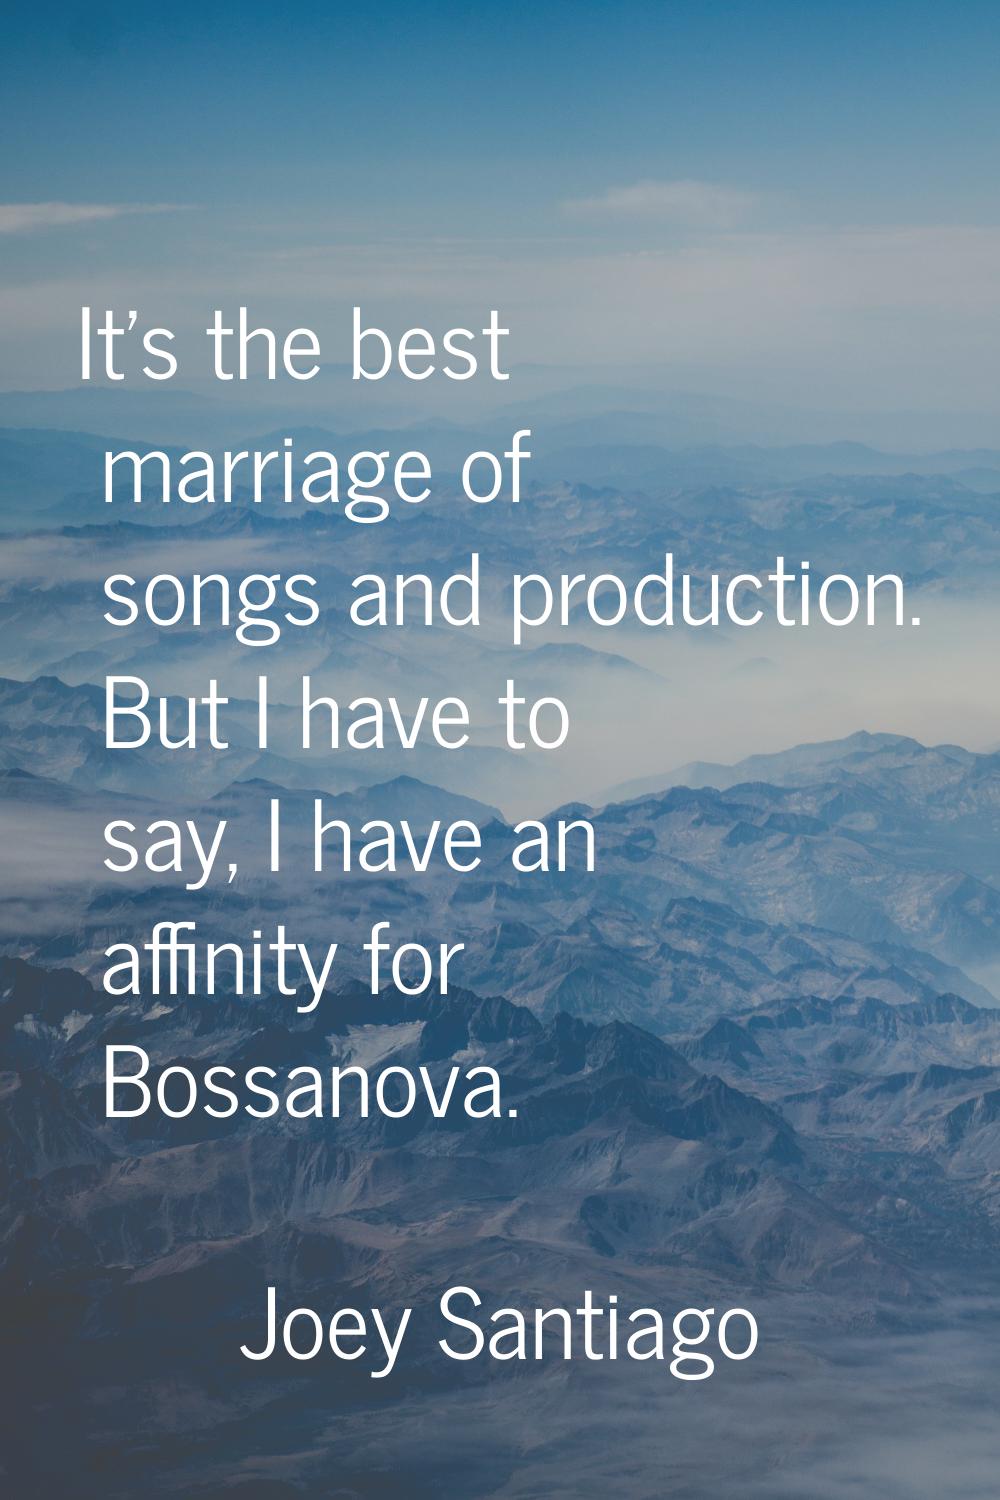 It's the best marriage of songs and production. But I have to say, I have an affinity for Bossanova